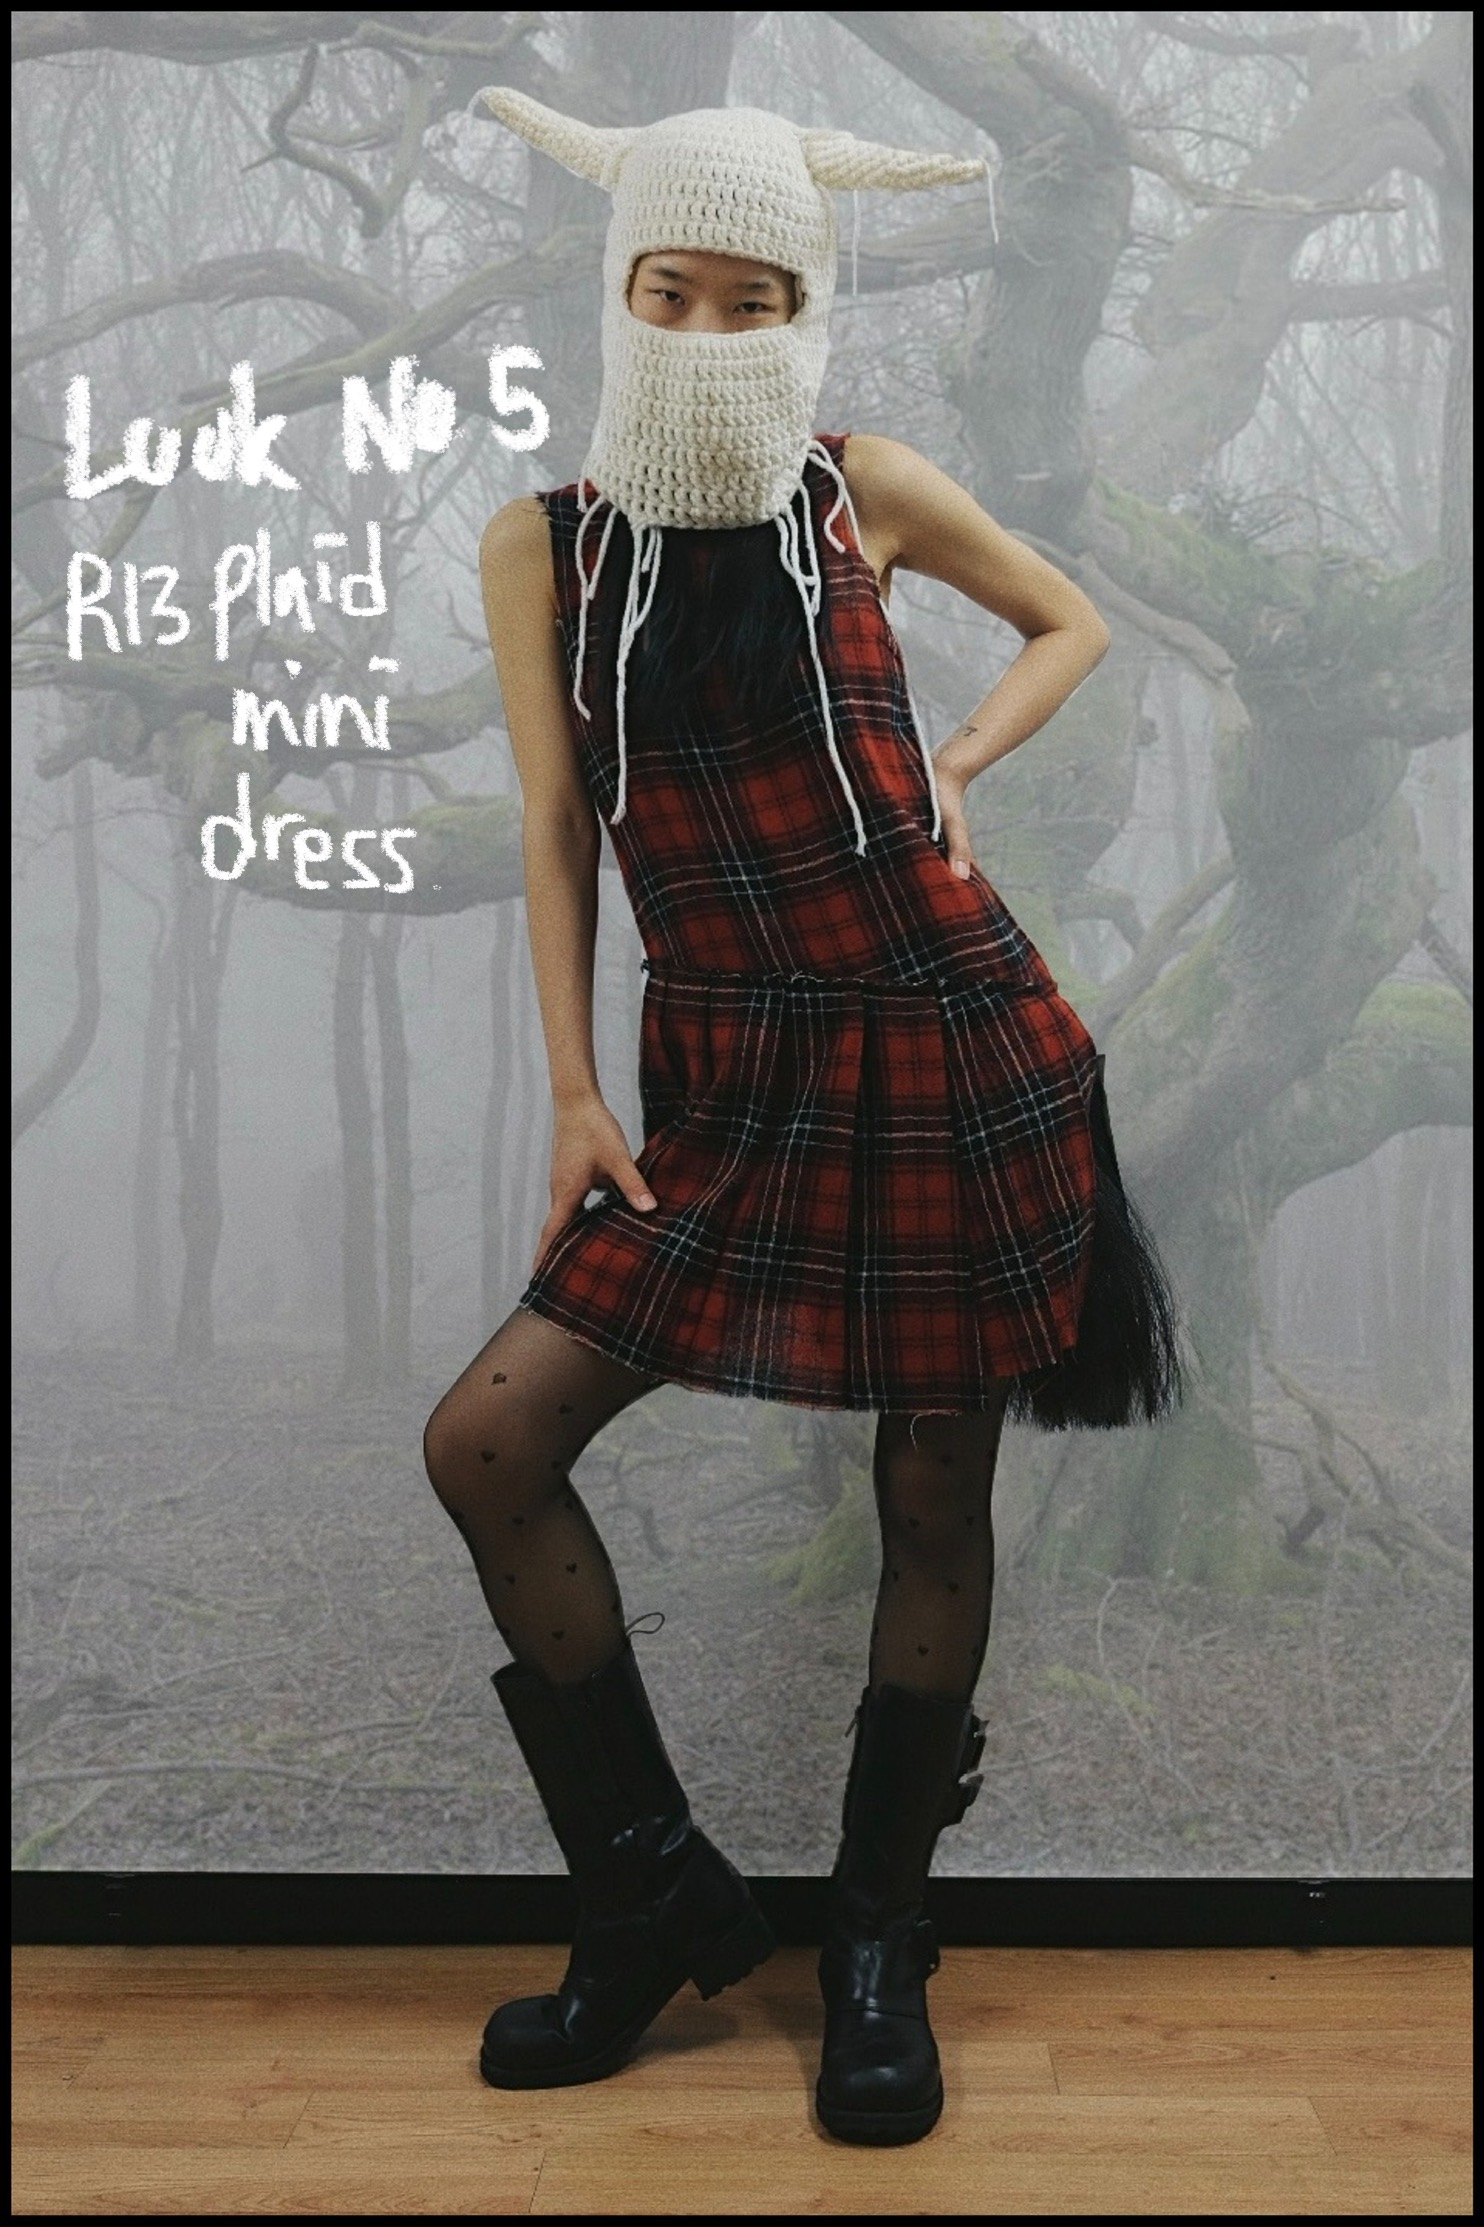 Look no.5 (one and only) R13 plaid mini dress